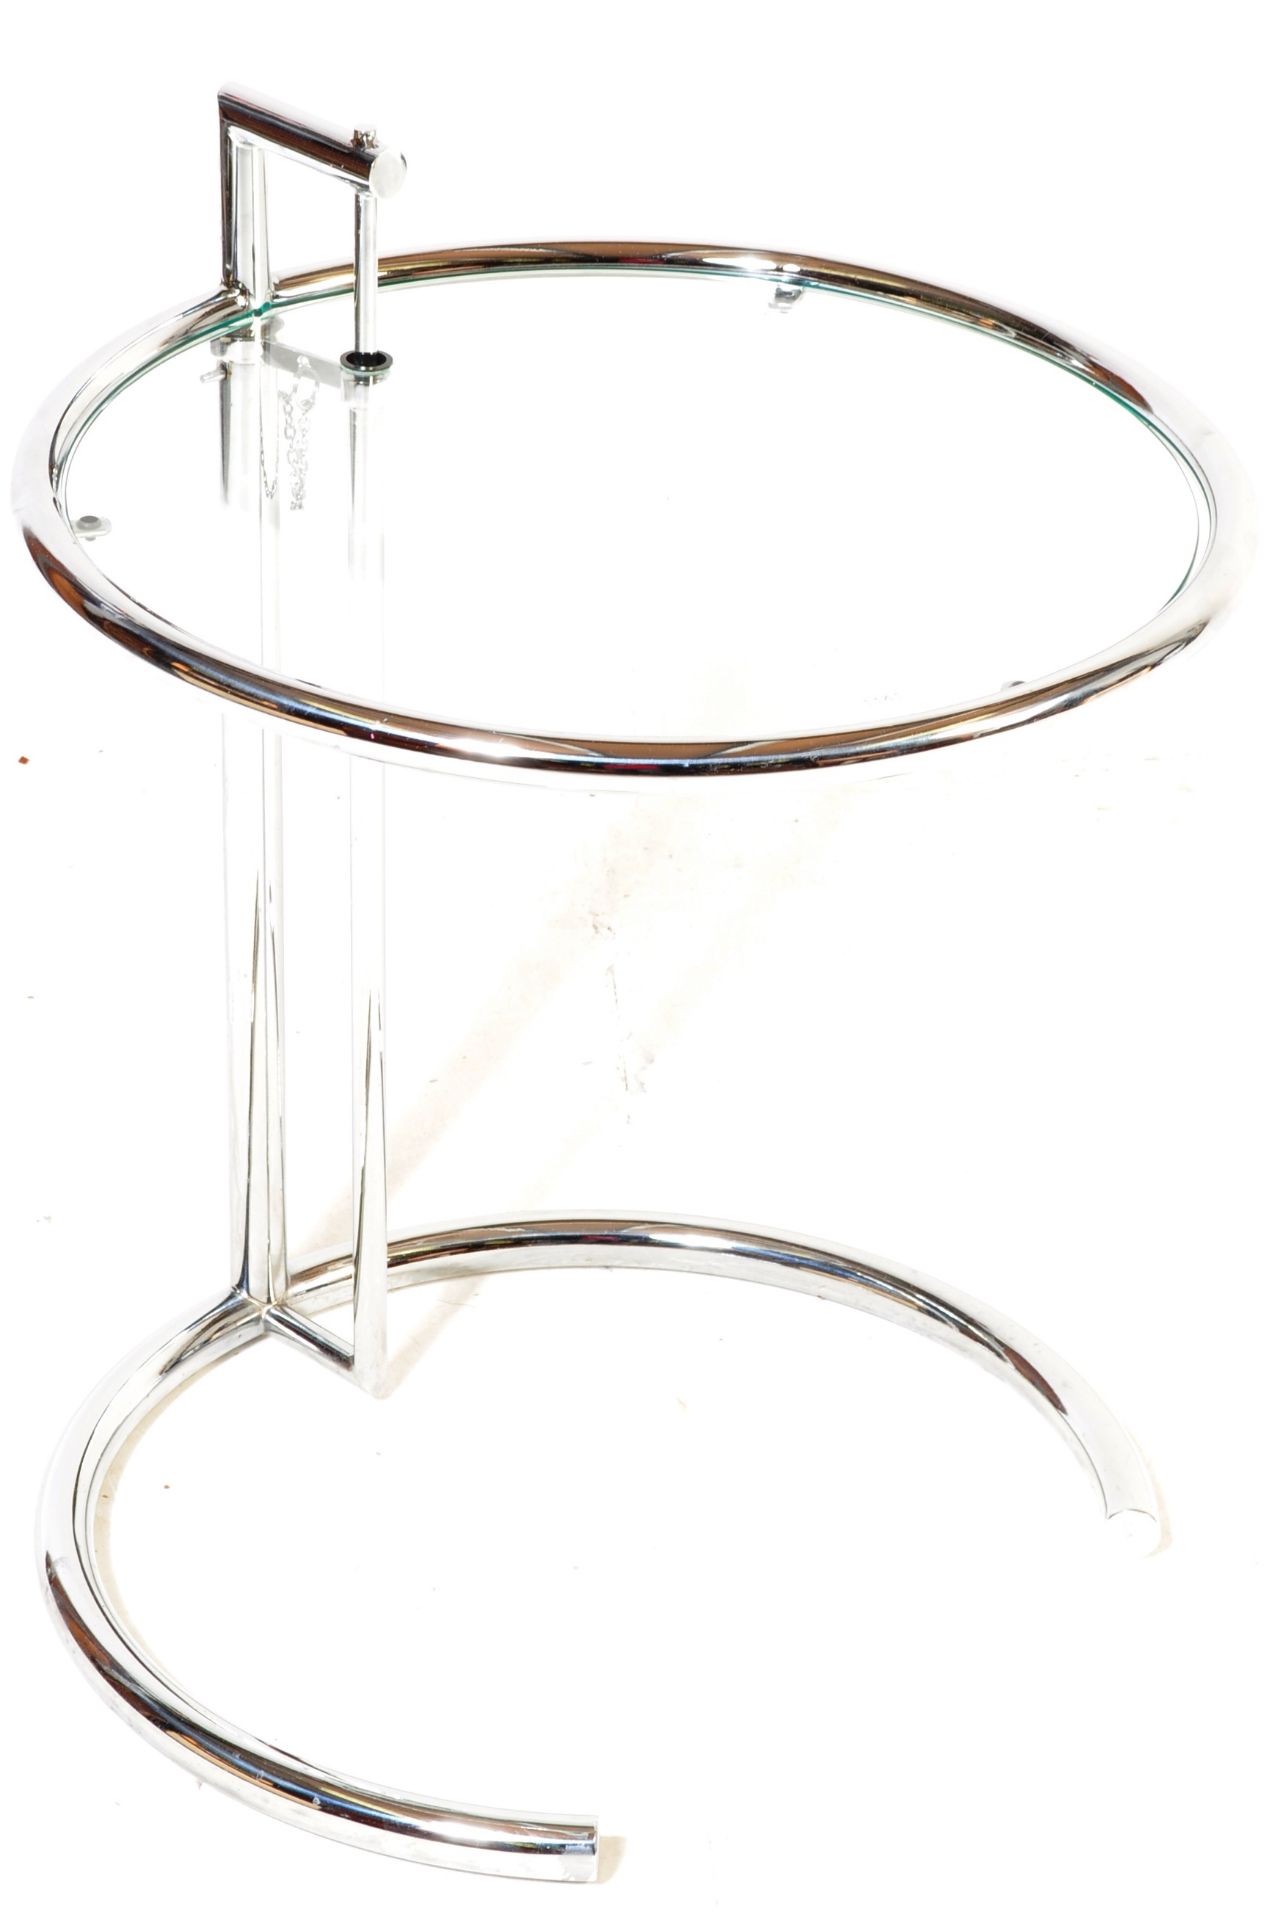 EILEEN GREY CHROME AND GLASS OCCASIONAL SIDE TABLE - Image 2 of 5